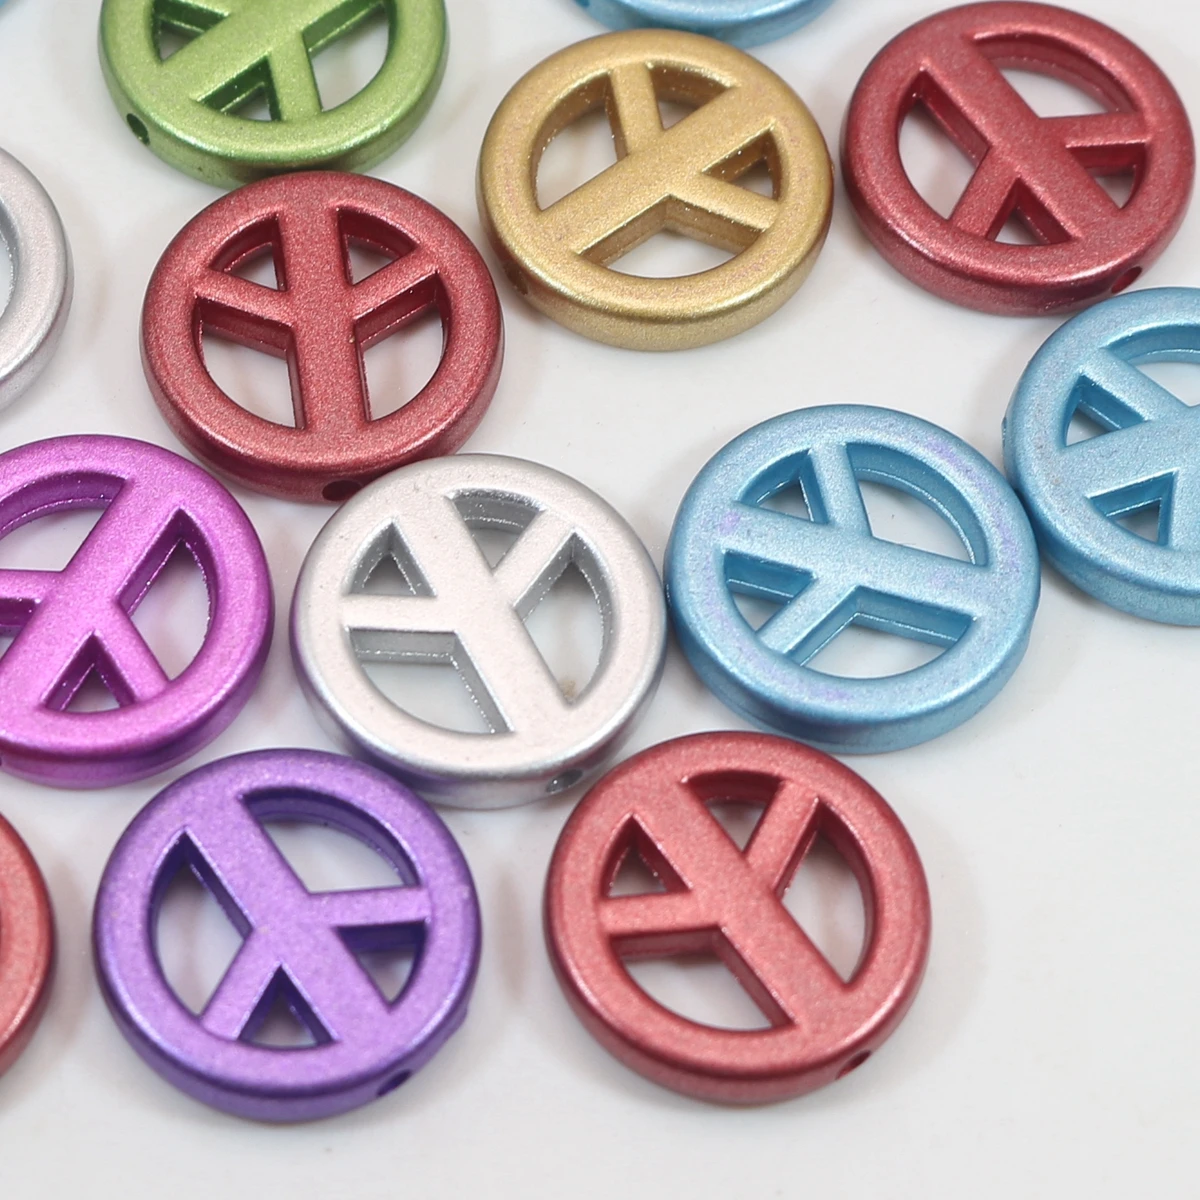 50 Mixed Metallic Colour Acrylic Peace Sign Beads Charms 20mm Jewelry Making